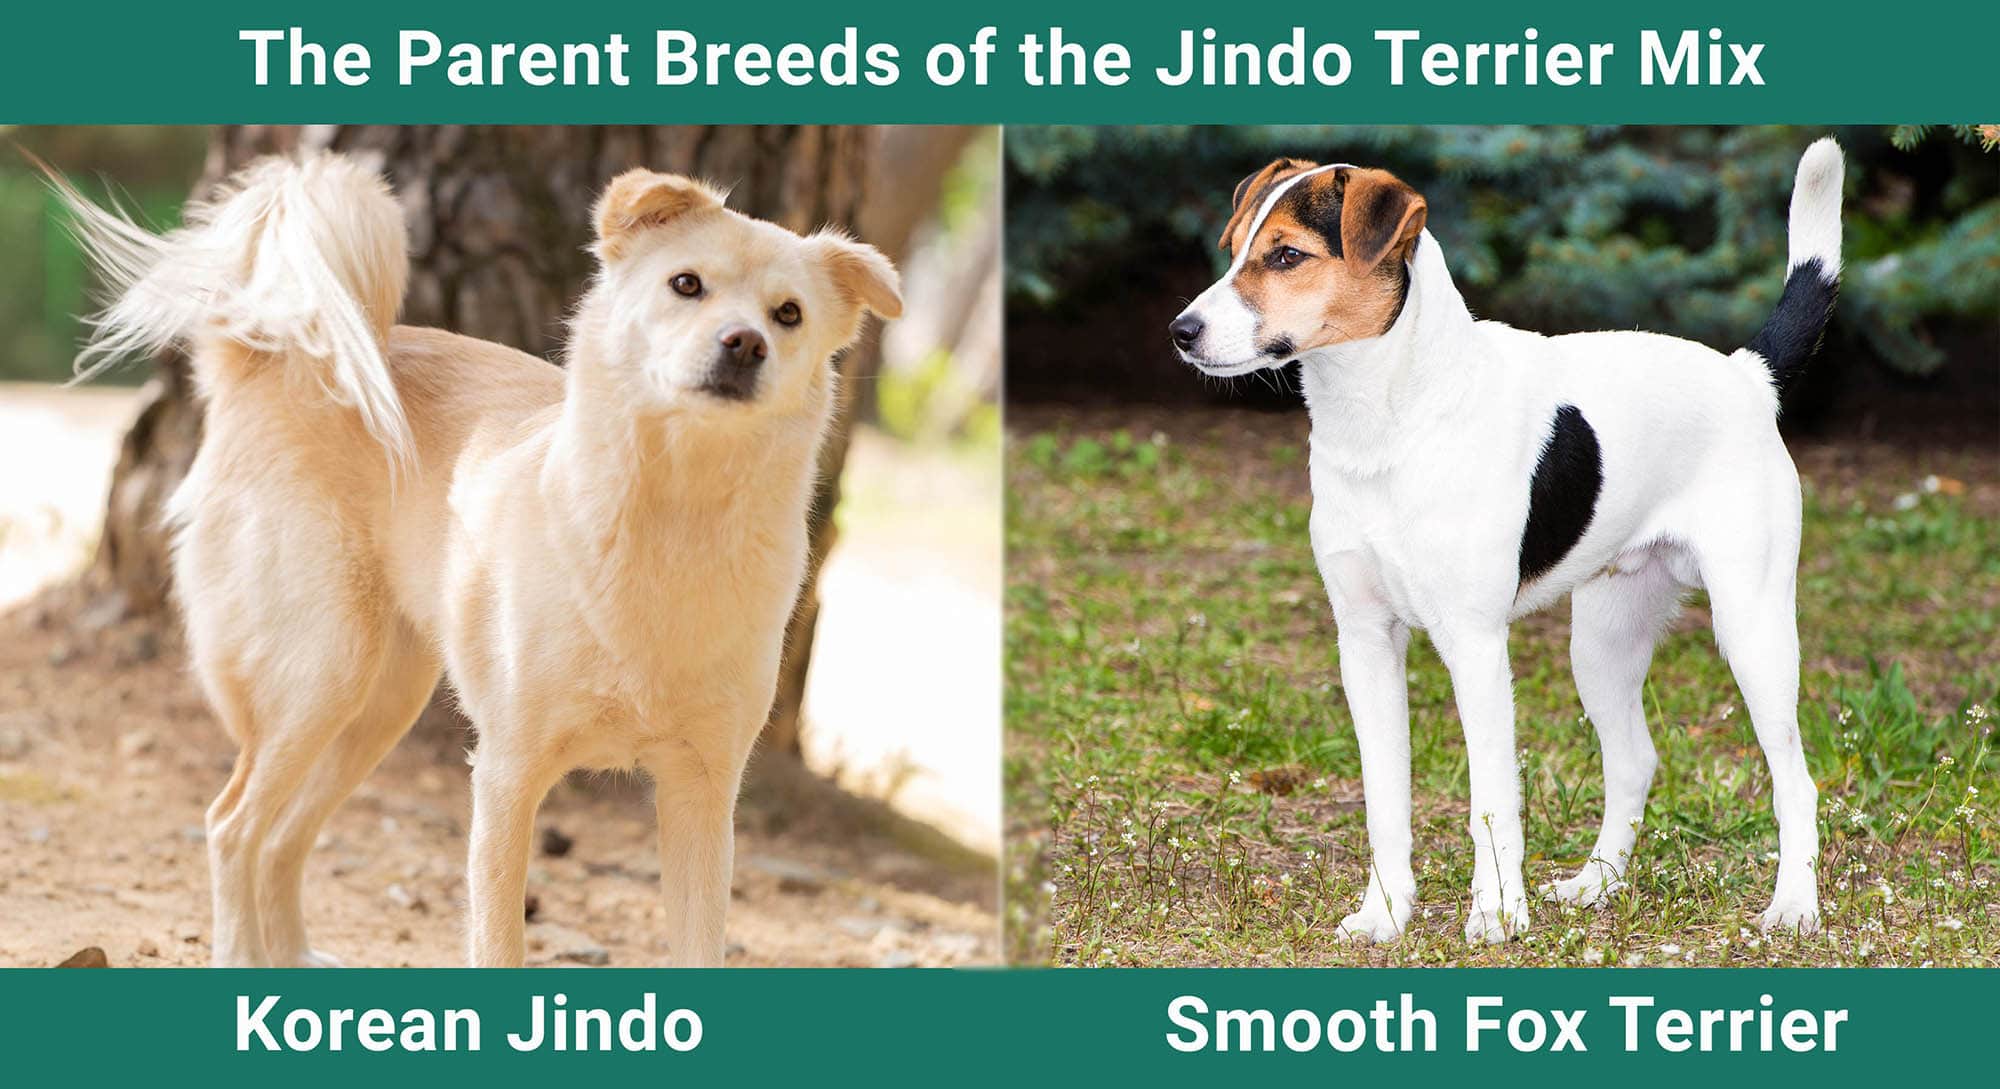 The Parent Breeds of the Jindo Terrier Mix